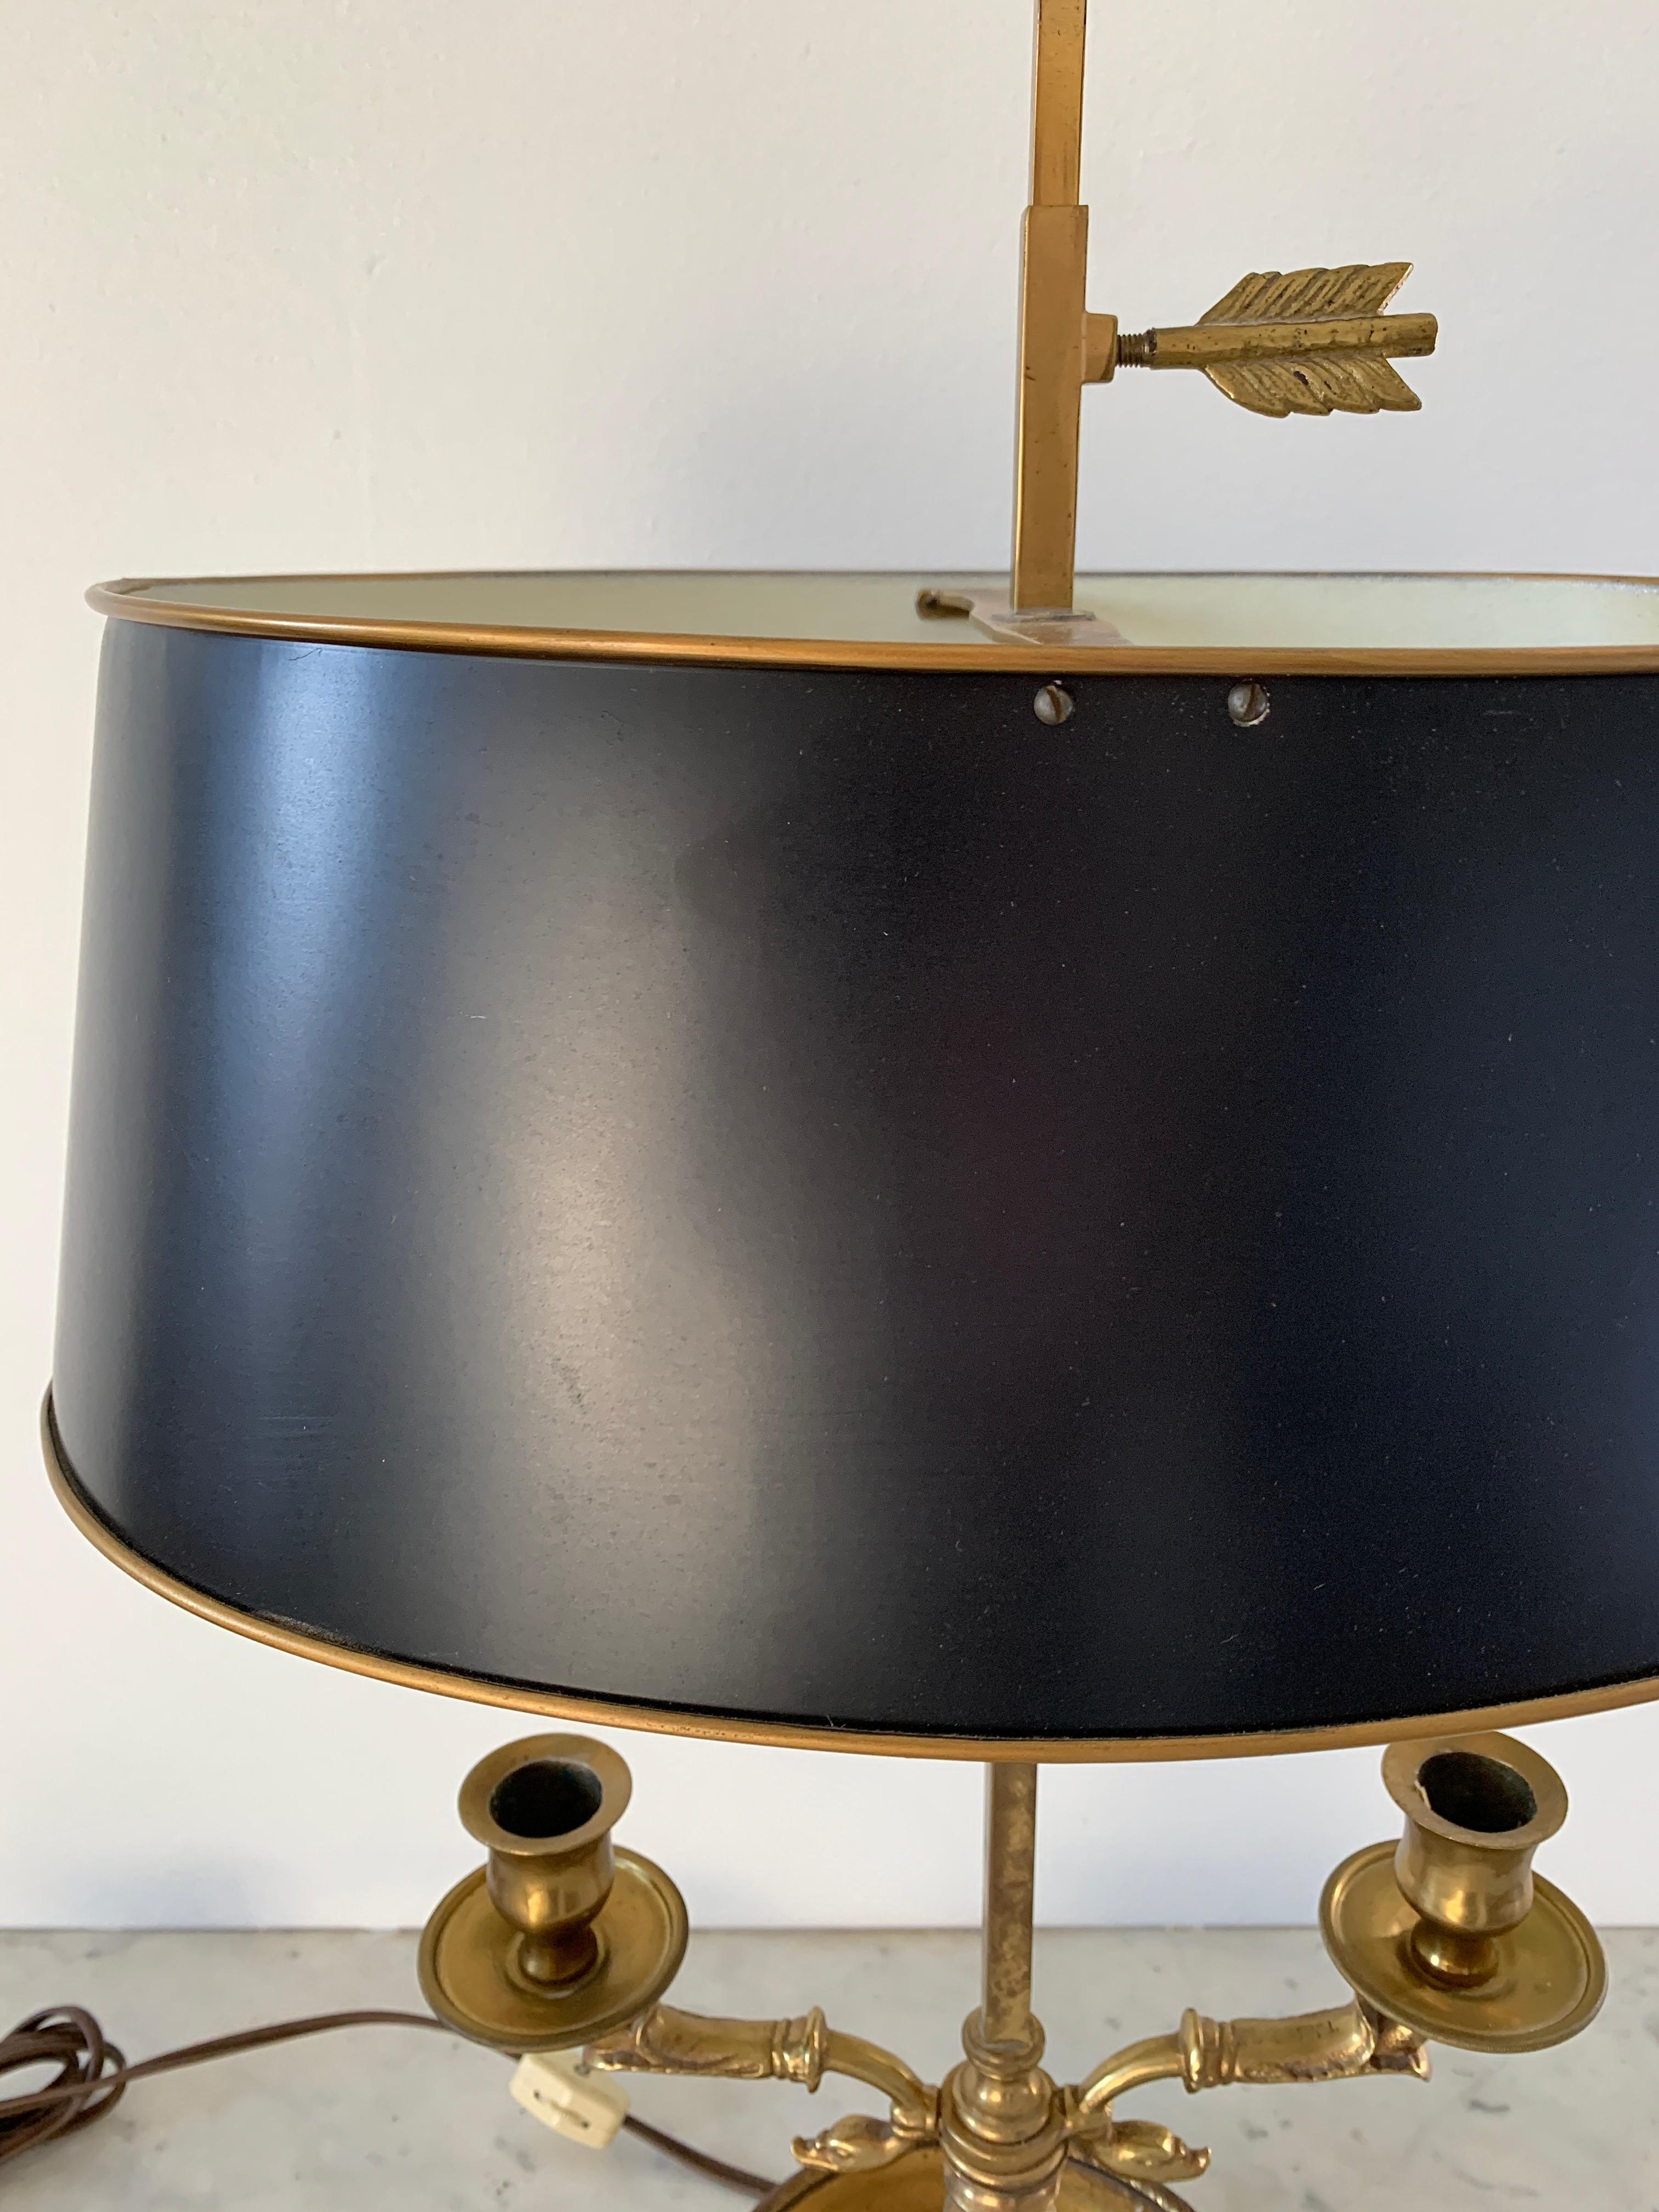 French Provincial Mid-20th Century Brass Bouillotte Double Dolphin Lamp with Black Tole Shade For Sale